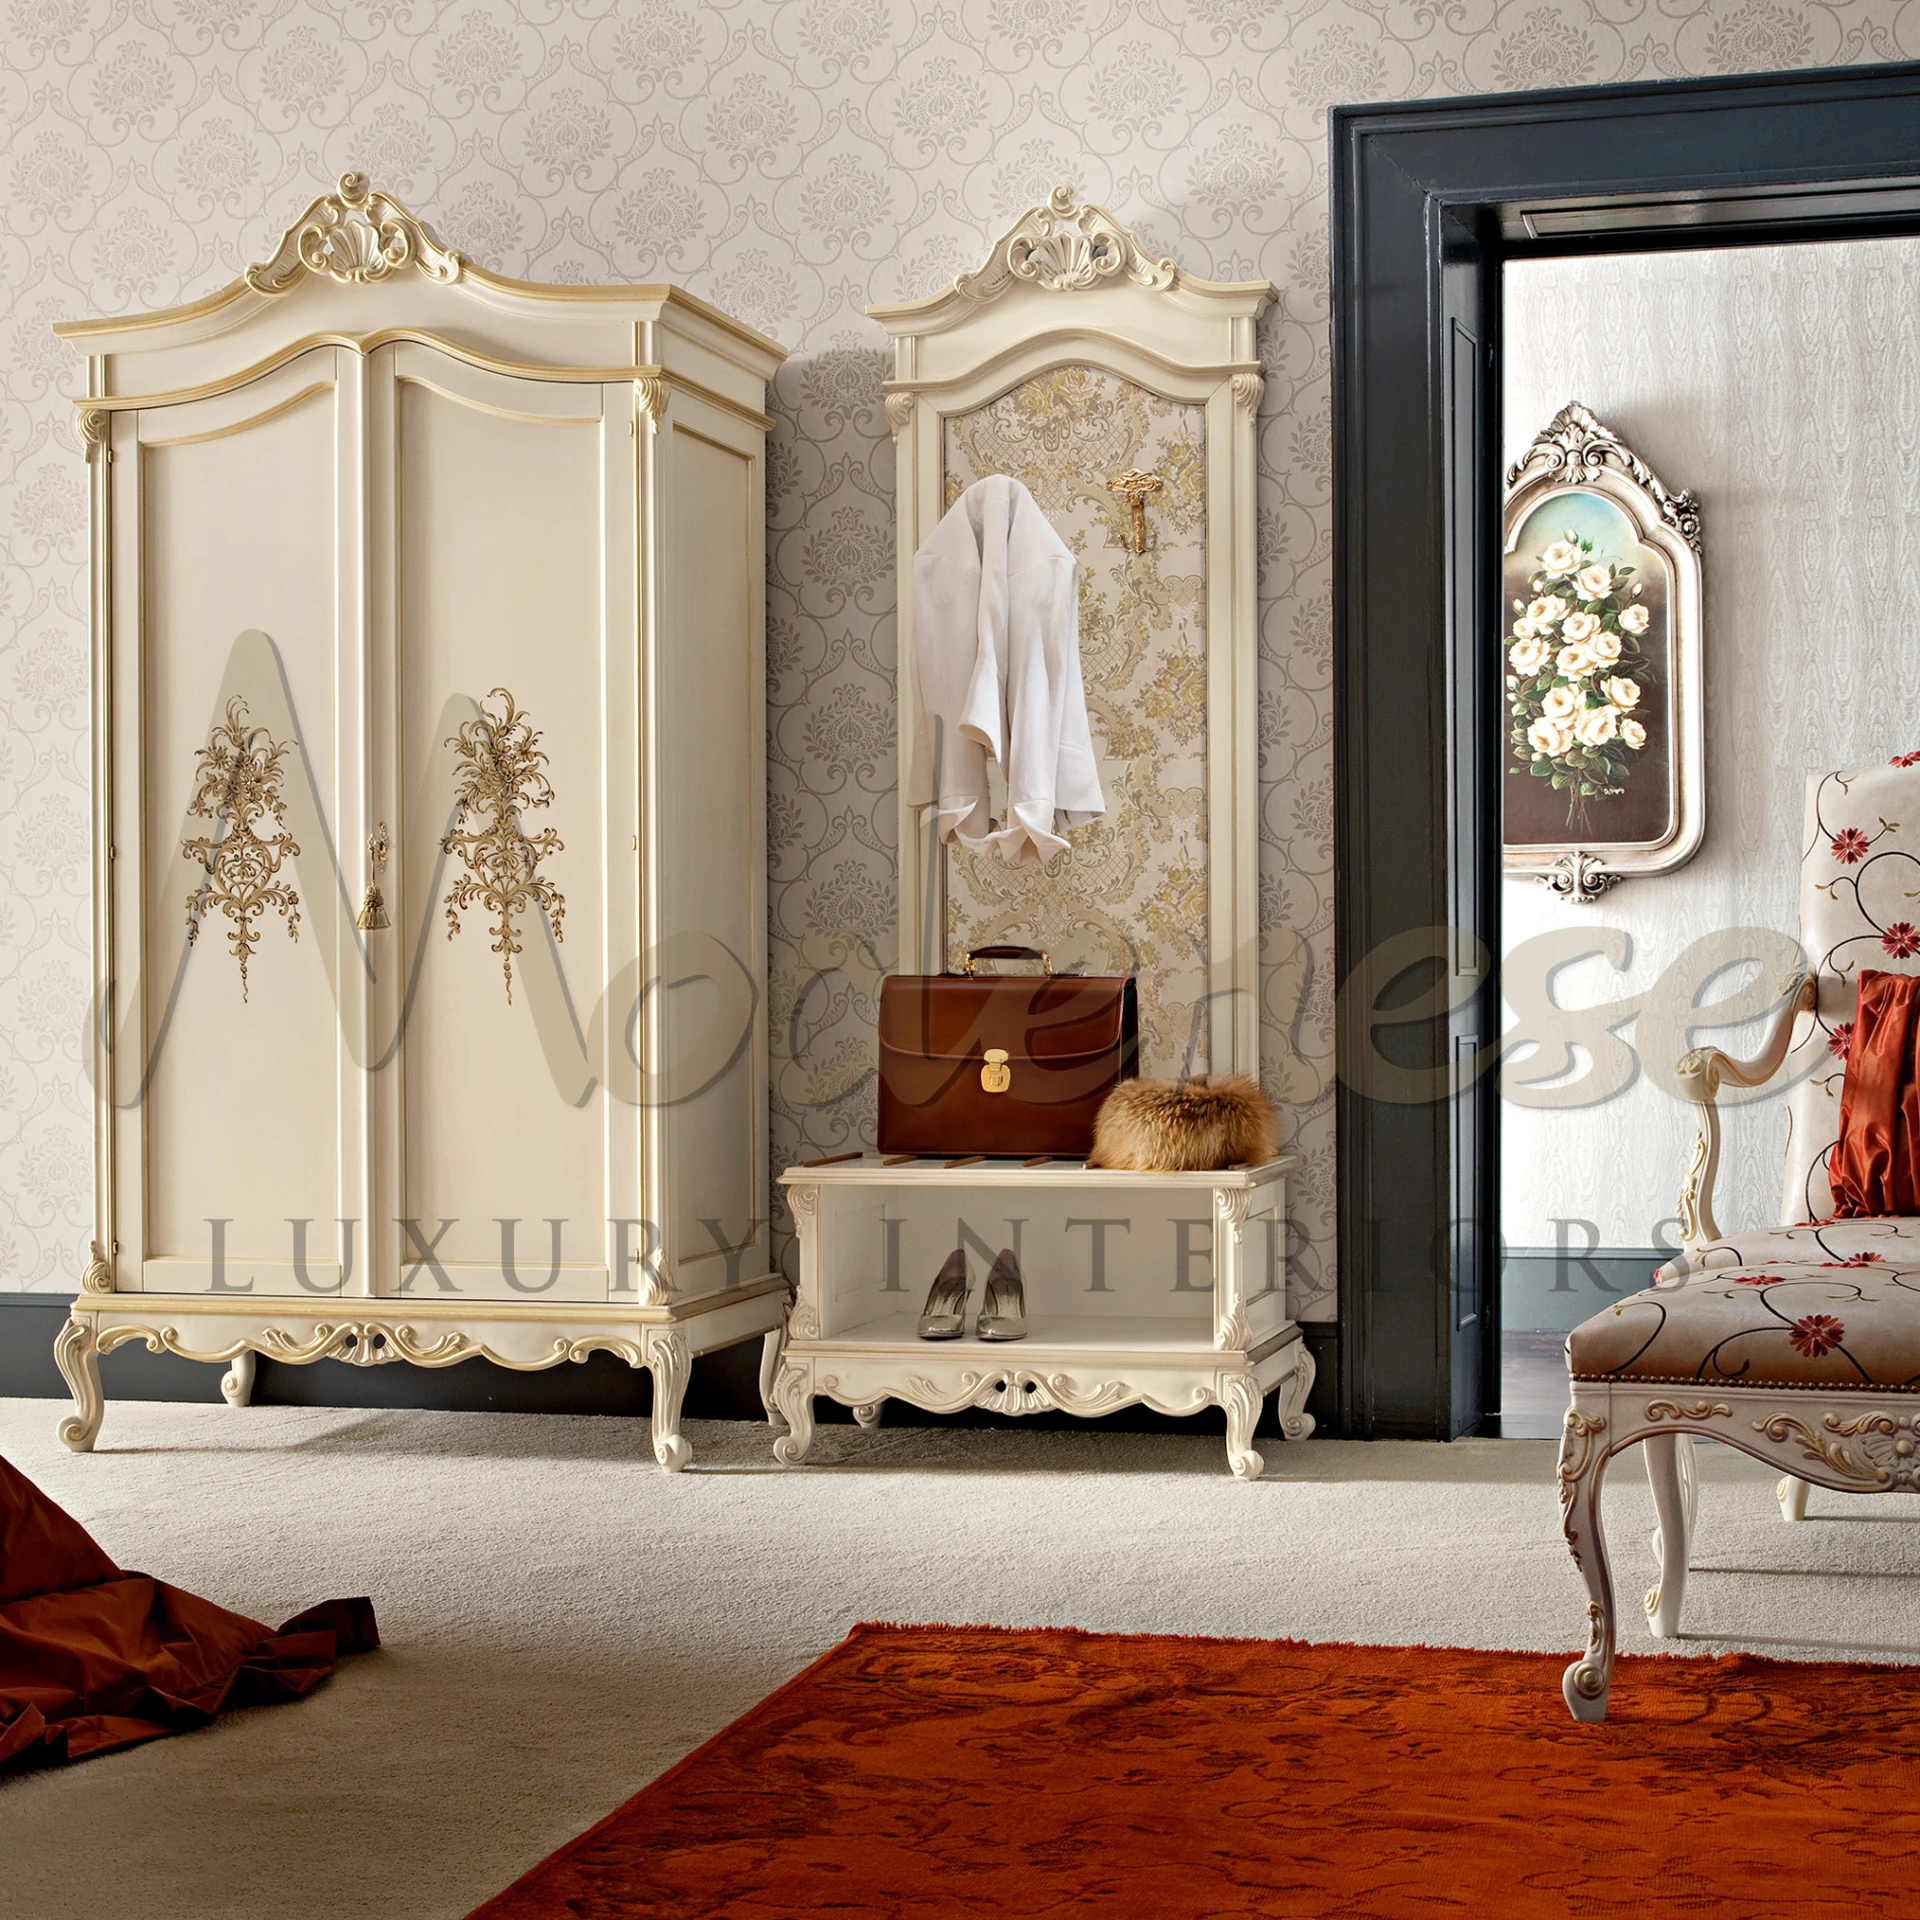  Elegant wardrobe stand with bench and patterned backdrop.